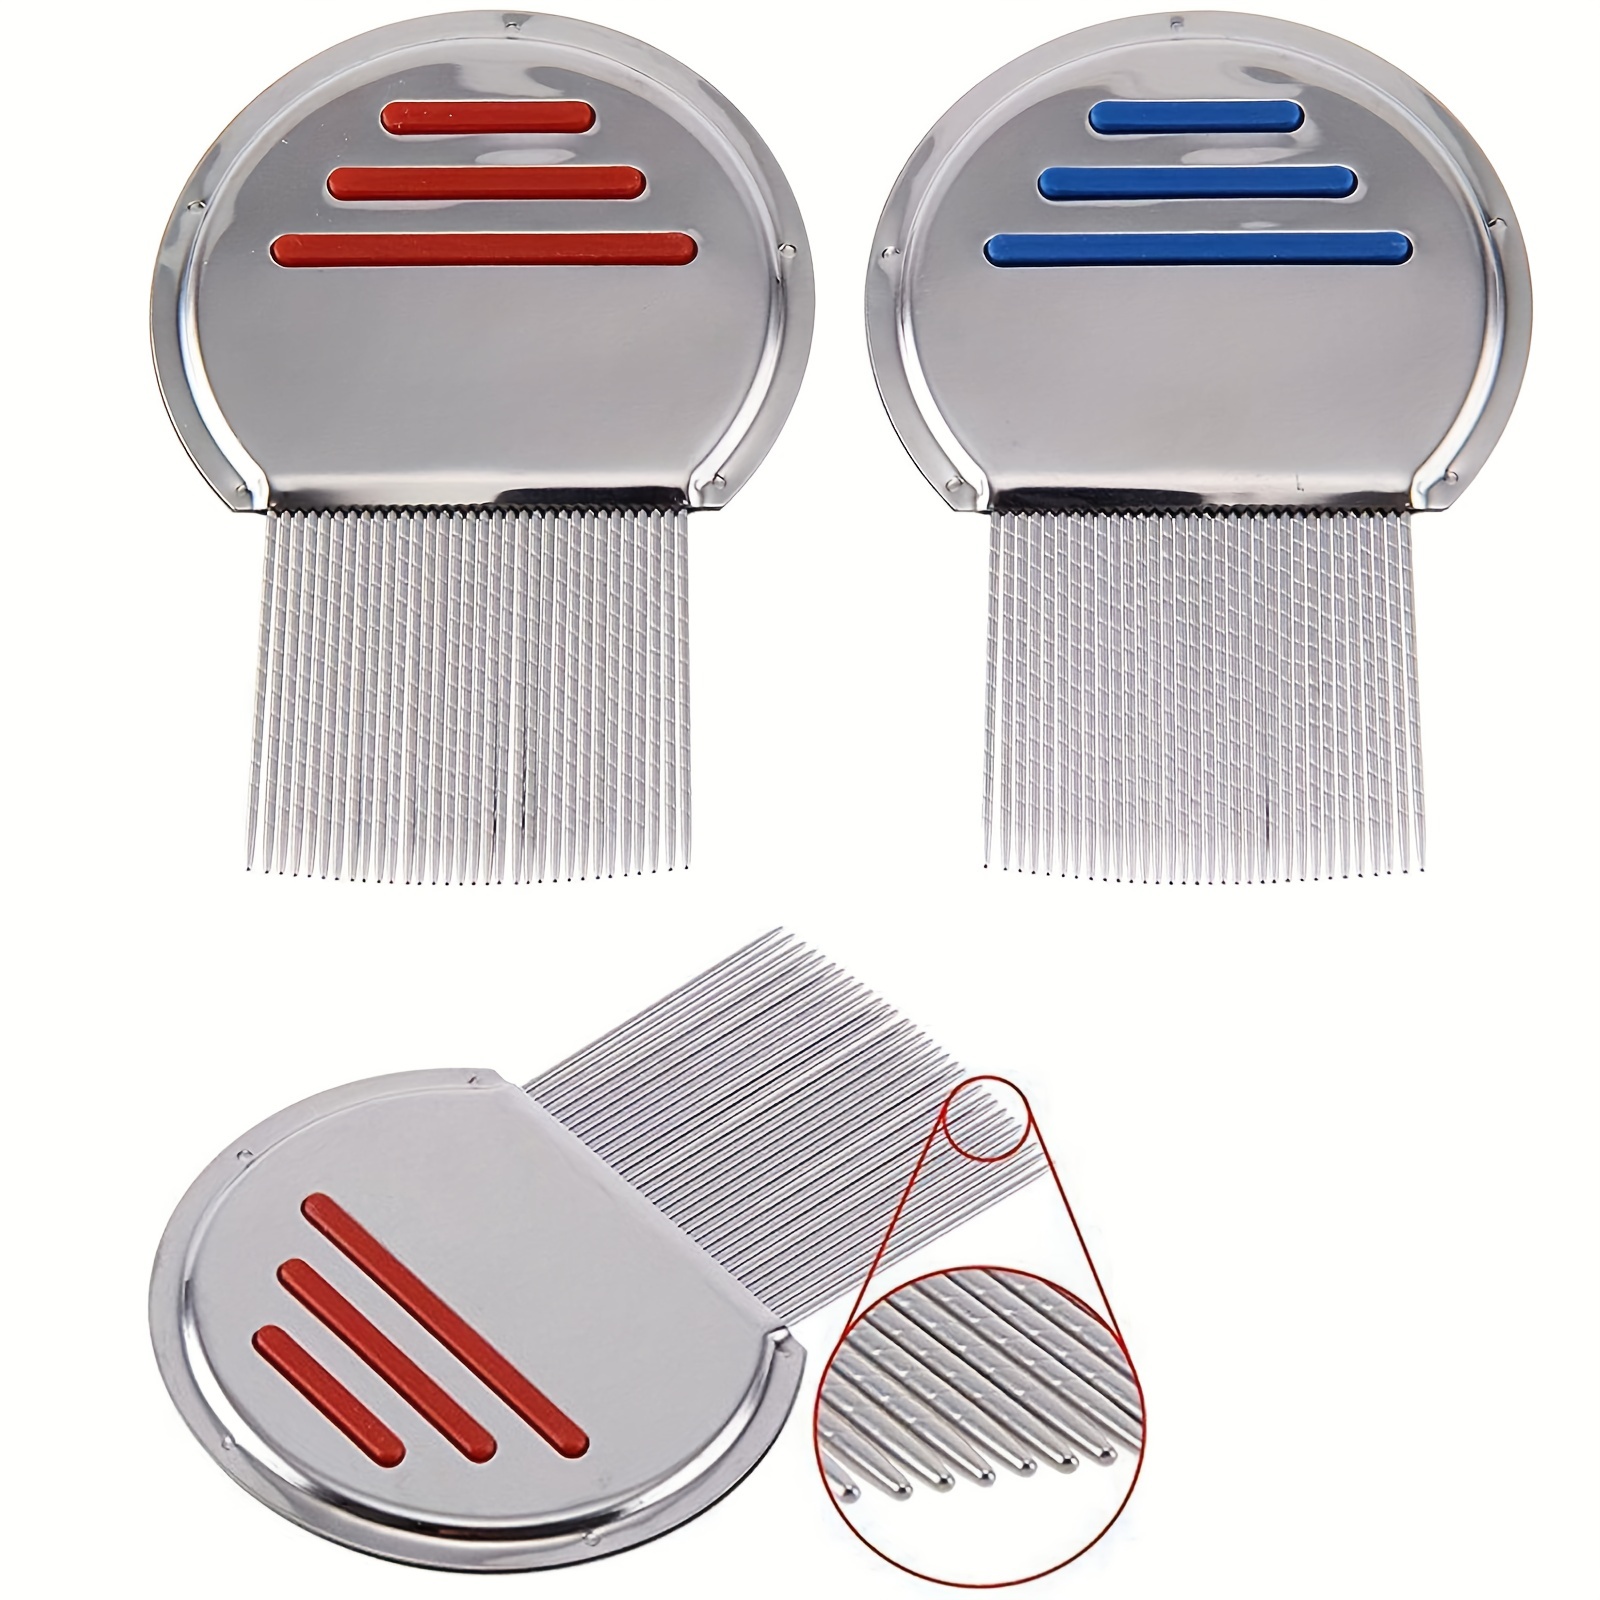 

3pcs Lice Comb, Pet Lice Treatment, Individually Packaged Professional Stainless Steel Louse And Nit Combs Removes Insect Eggs With Rounded Tips For Comfort